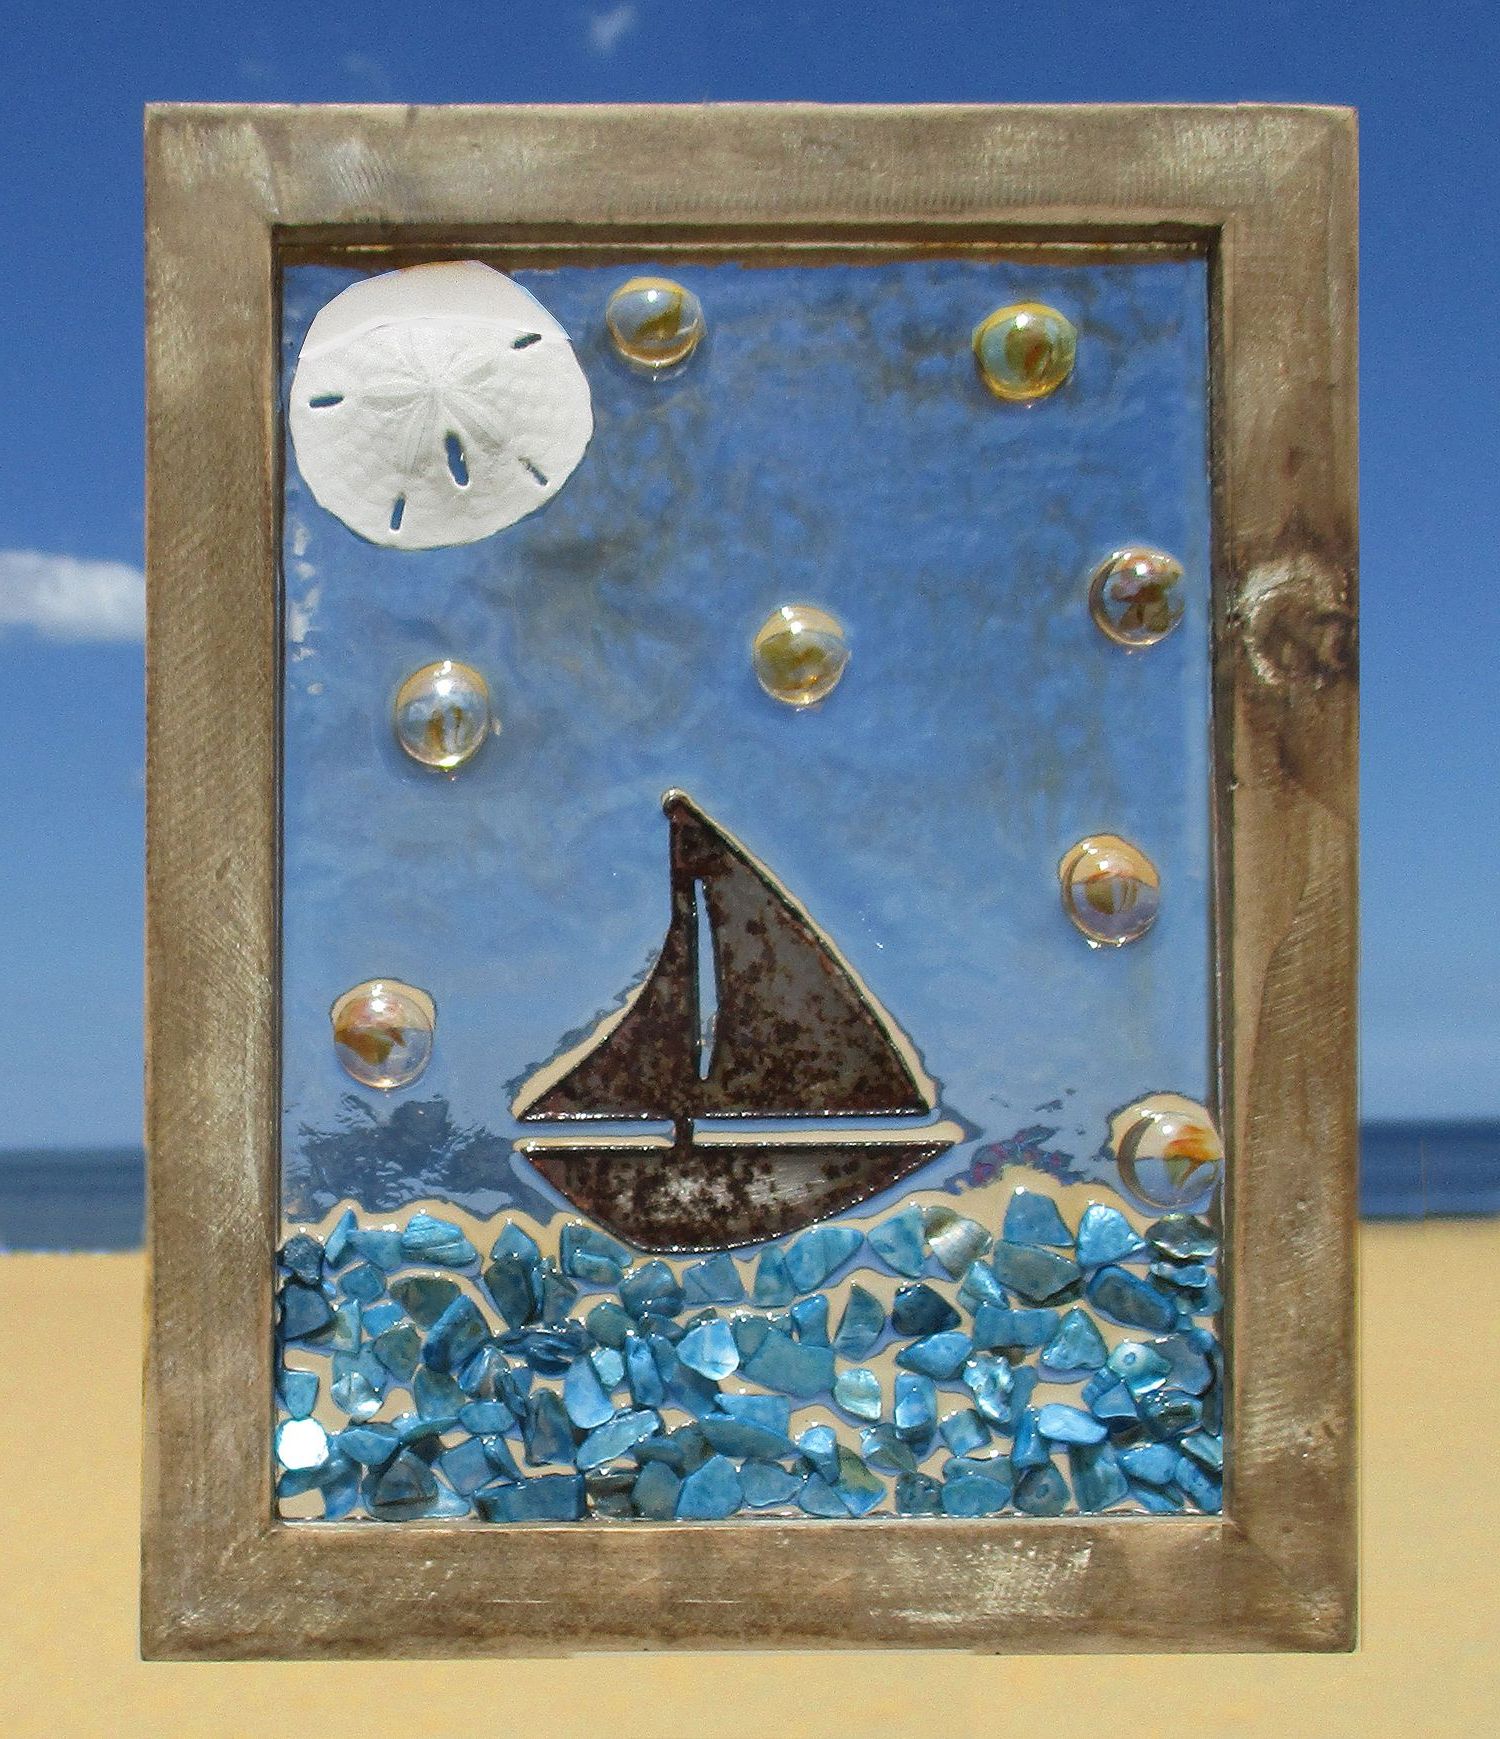 Most Up To Date Rusty Scrap Metal Sailboat In An Ocean Of Blue Abalone Shells, With An Intended For Sand And Sea Metal Wall Art (View 11 of 15)